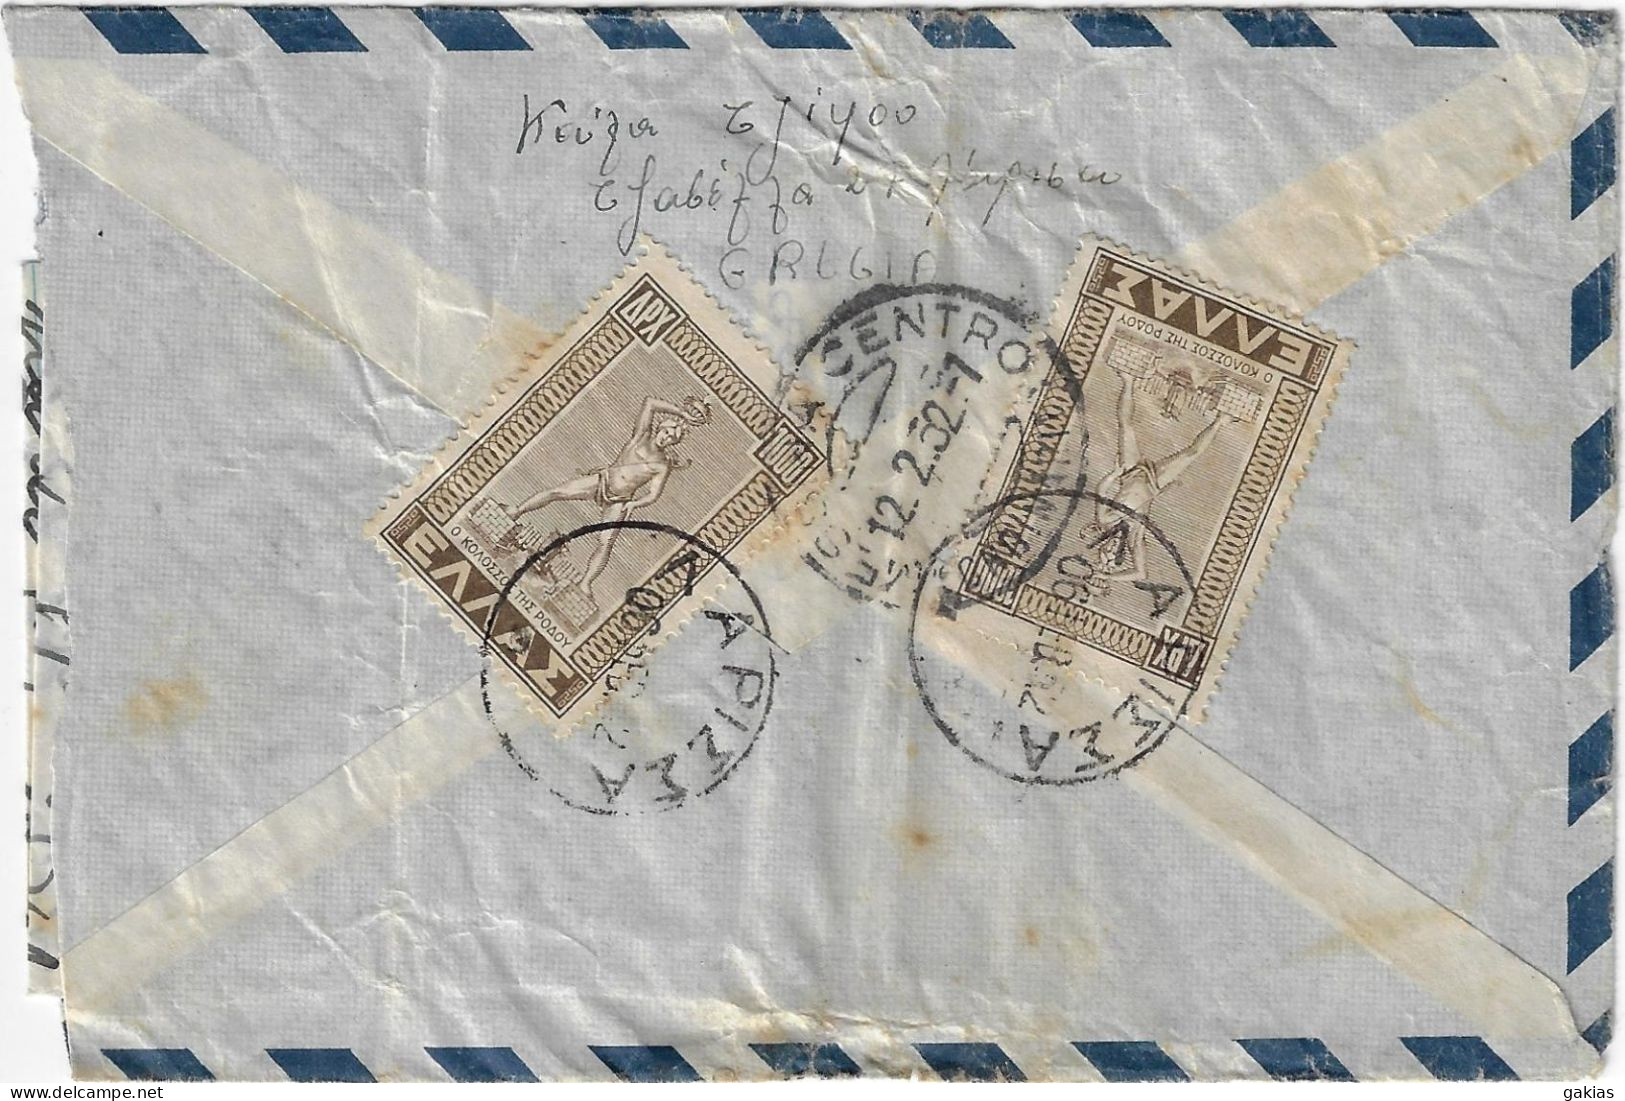 GREECE 1952 AIR COVER LARISSA TO MESSINA/ITALY. - Covers & Documents